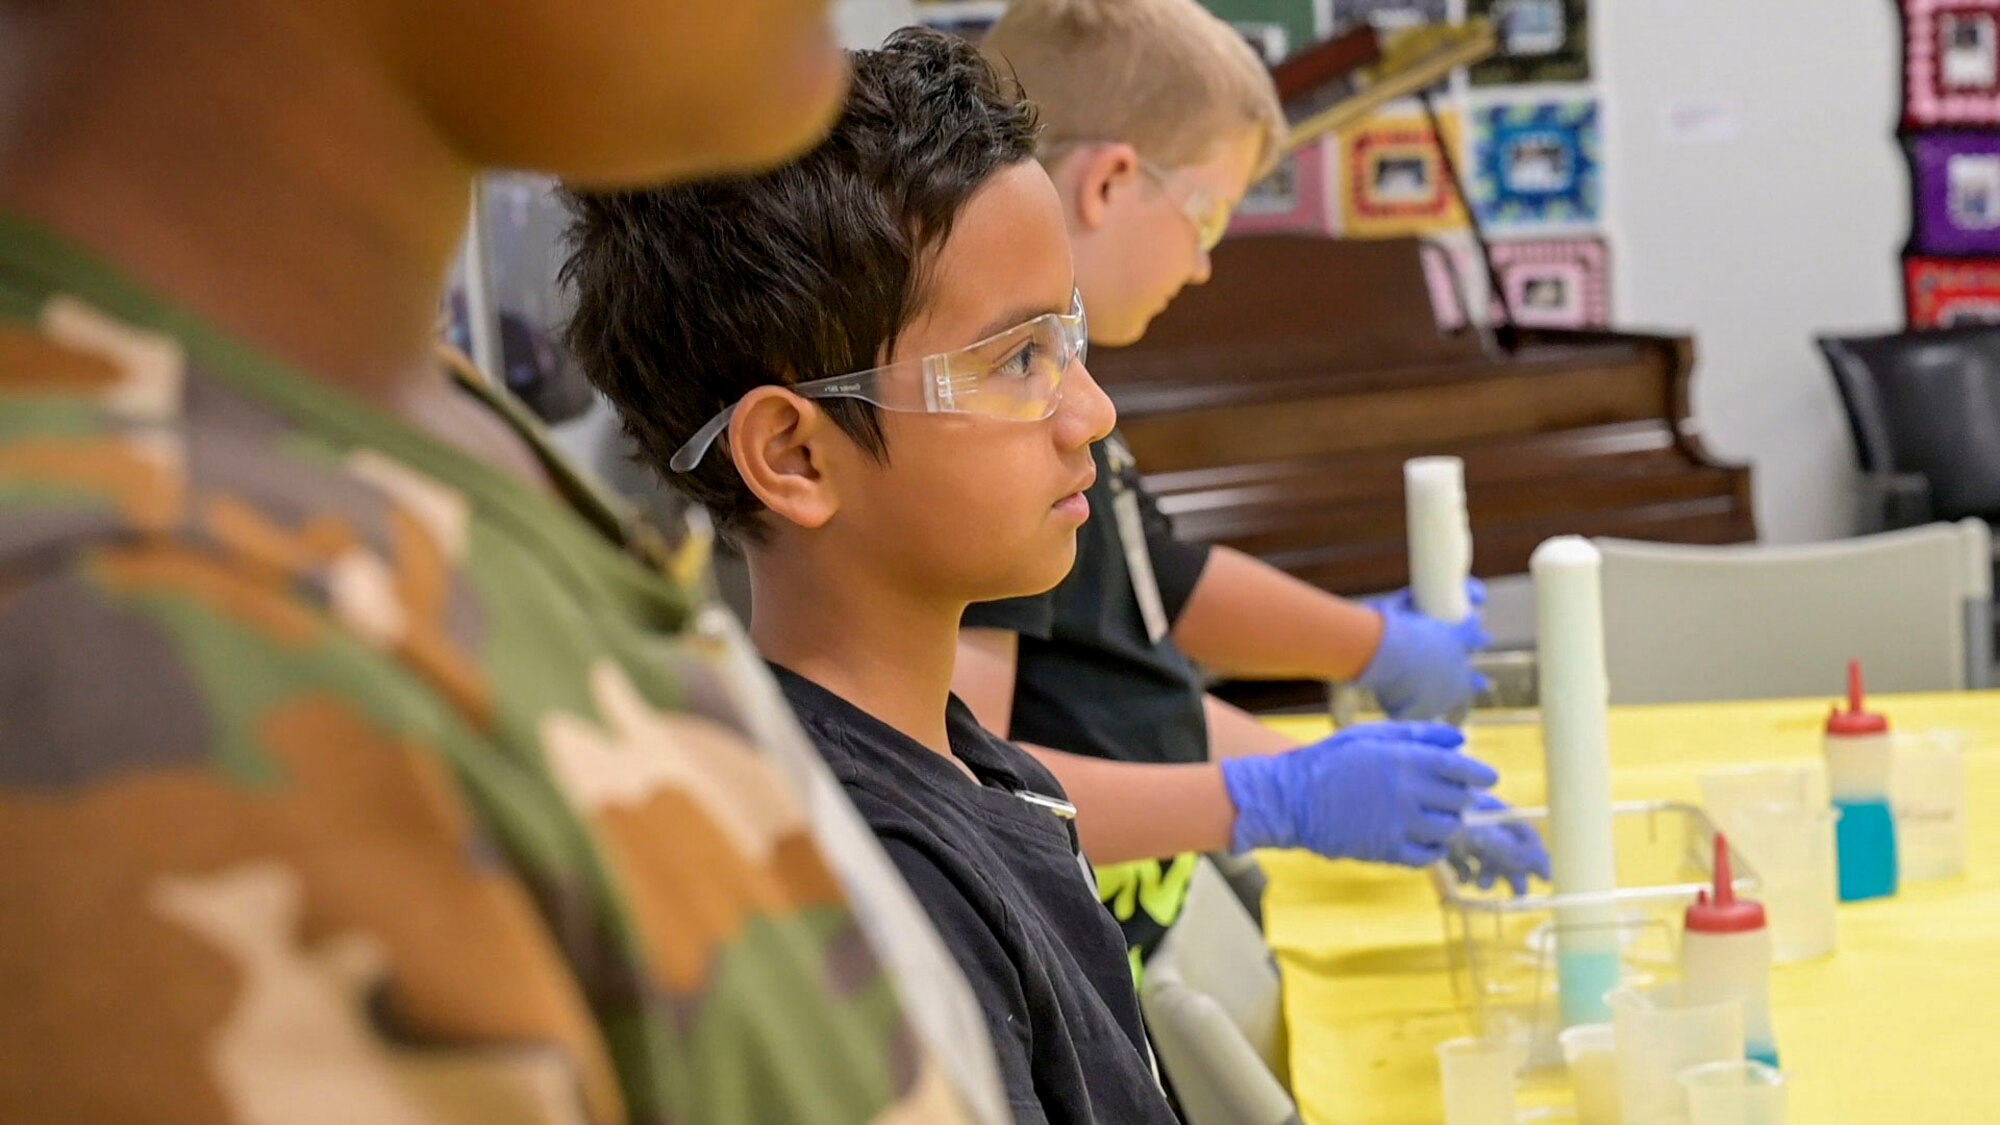 A STARBASE Edwards student participates in "Bubble Trouble" a STEM activity designed to teach kids about science. STARBASE is a Department of Defense program designed to engage and immerse students in the world of science, technology, engineering and math.